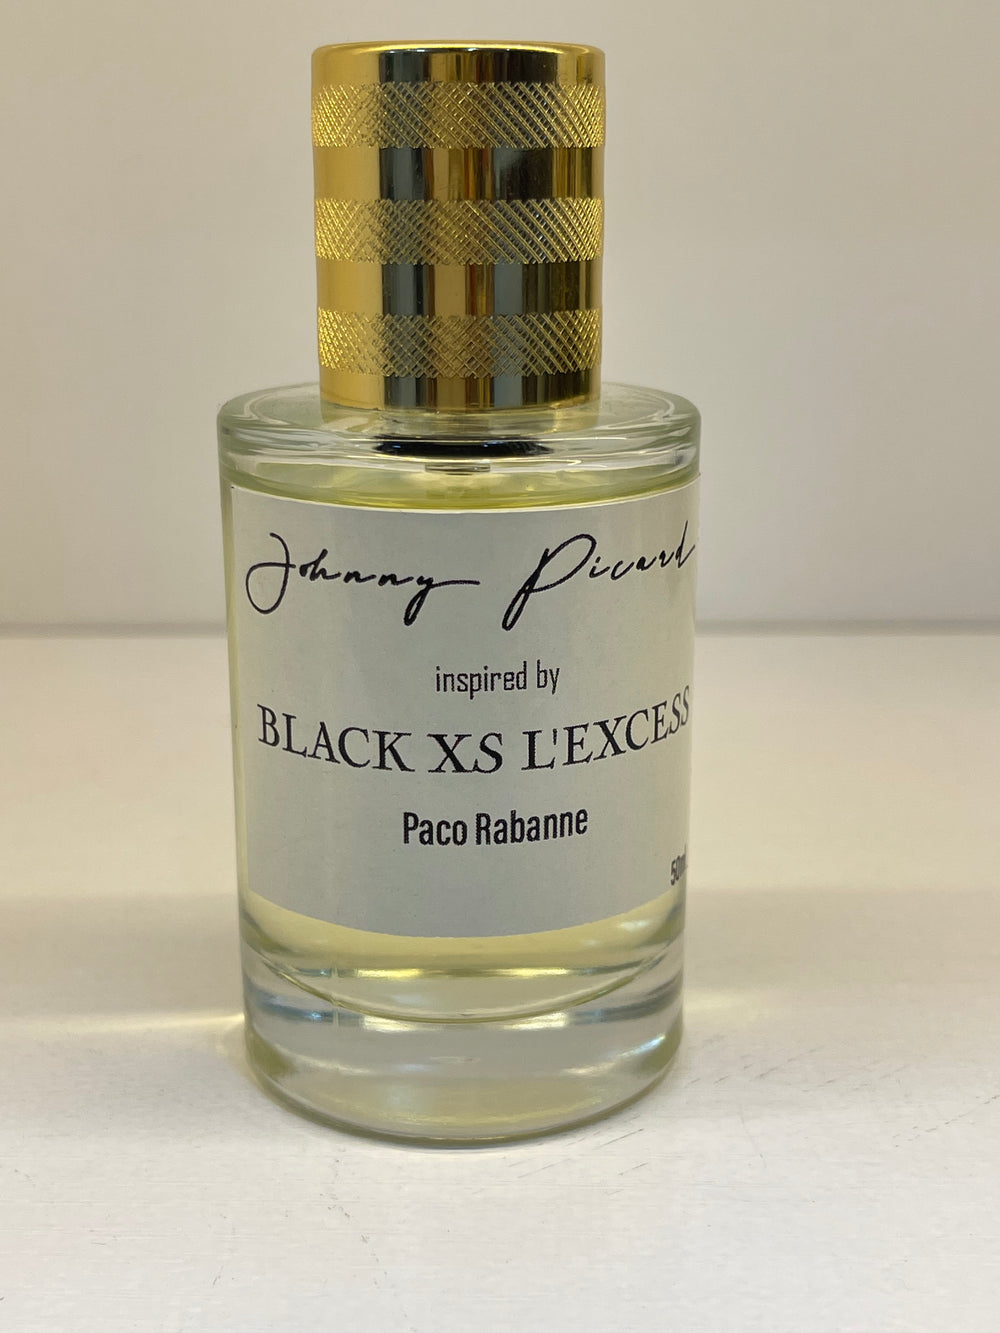 Johnny Picard Inspired By Black Xs L'excess  PACO RABANNE